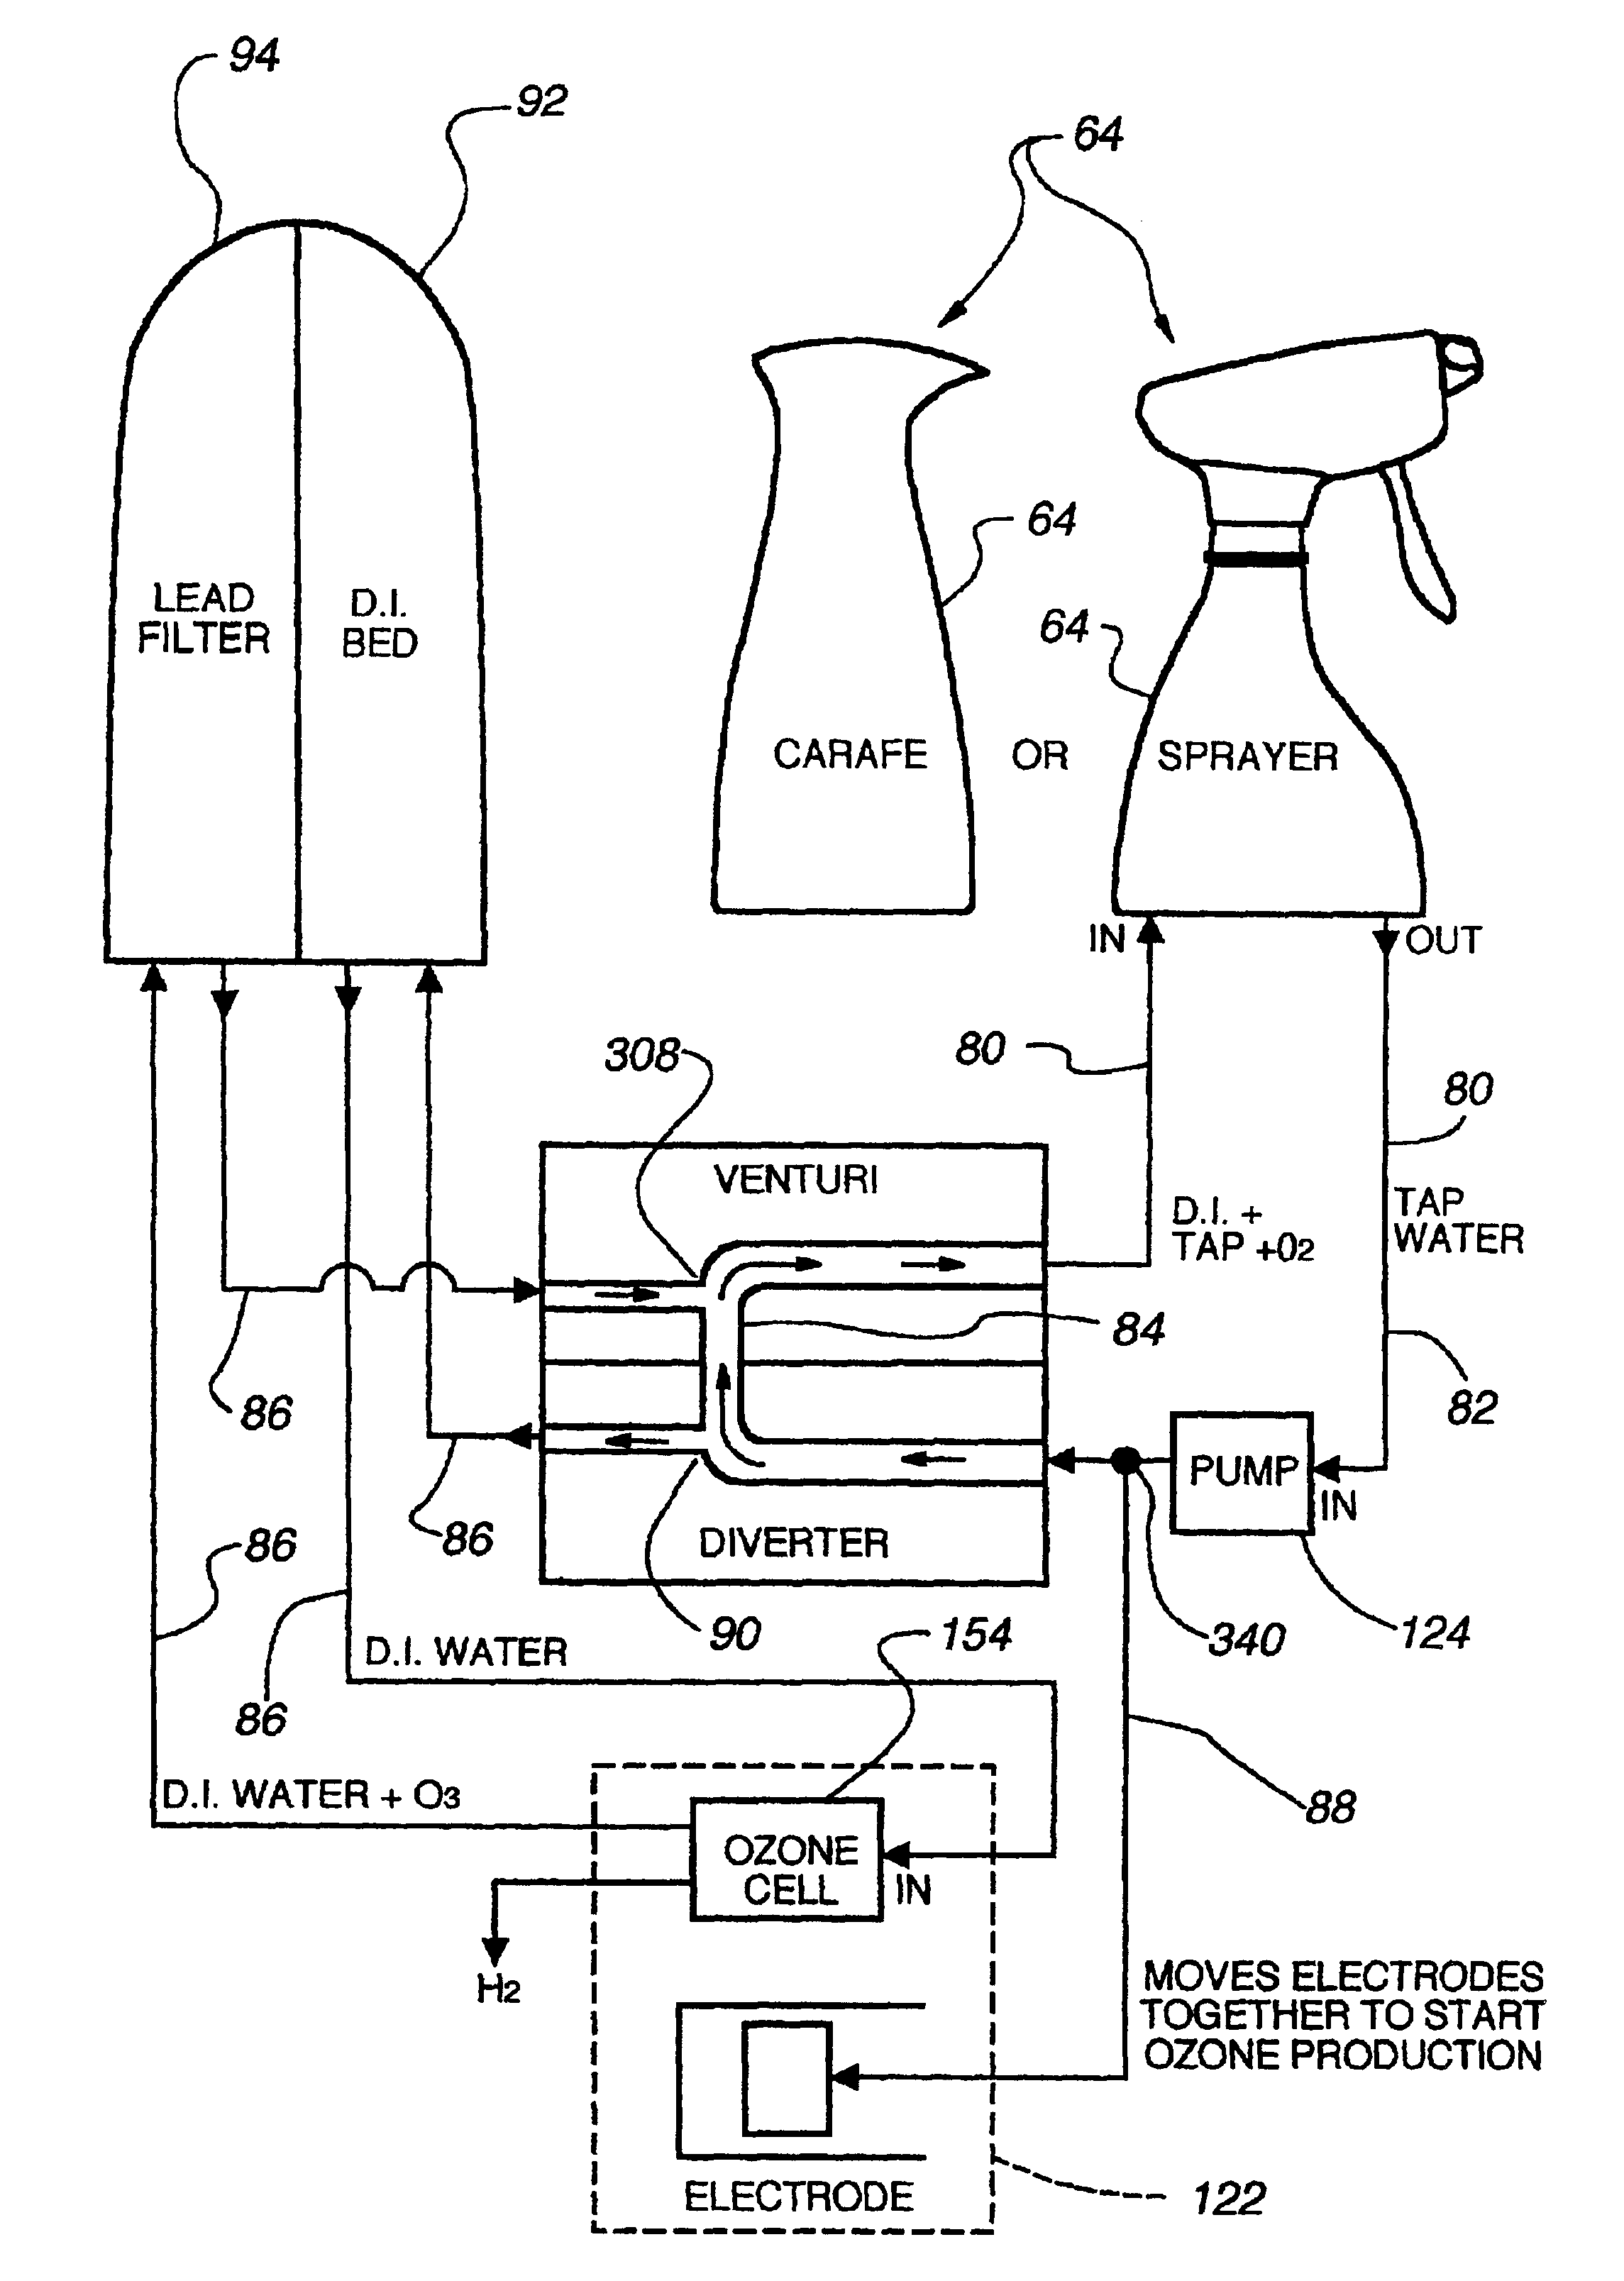 Device and method for generating and applying ozonated water